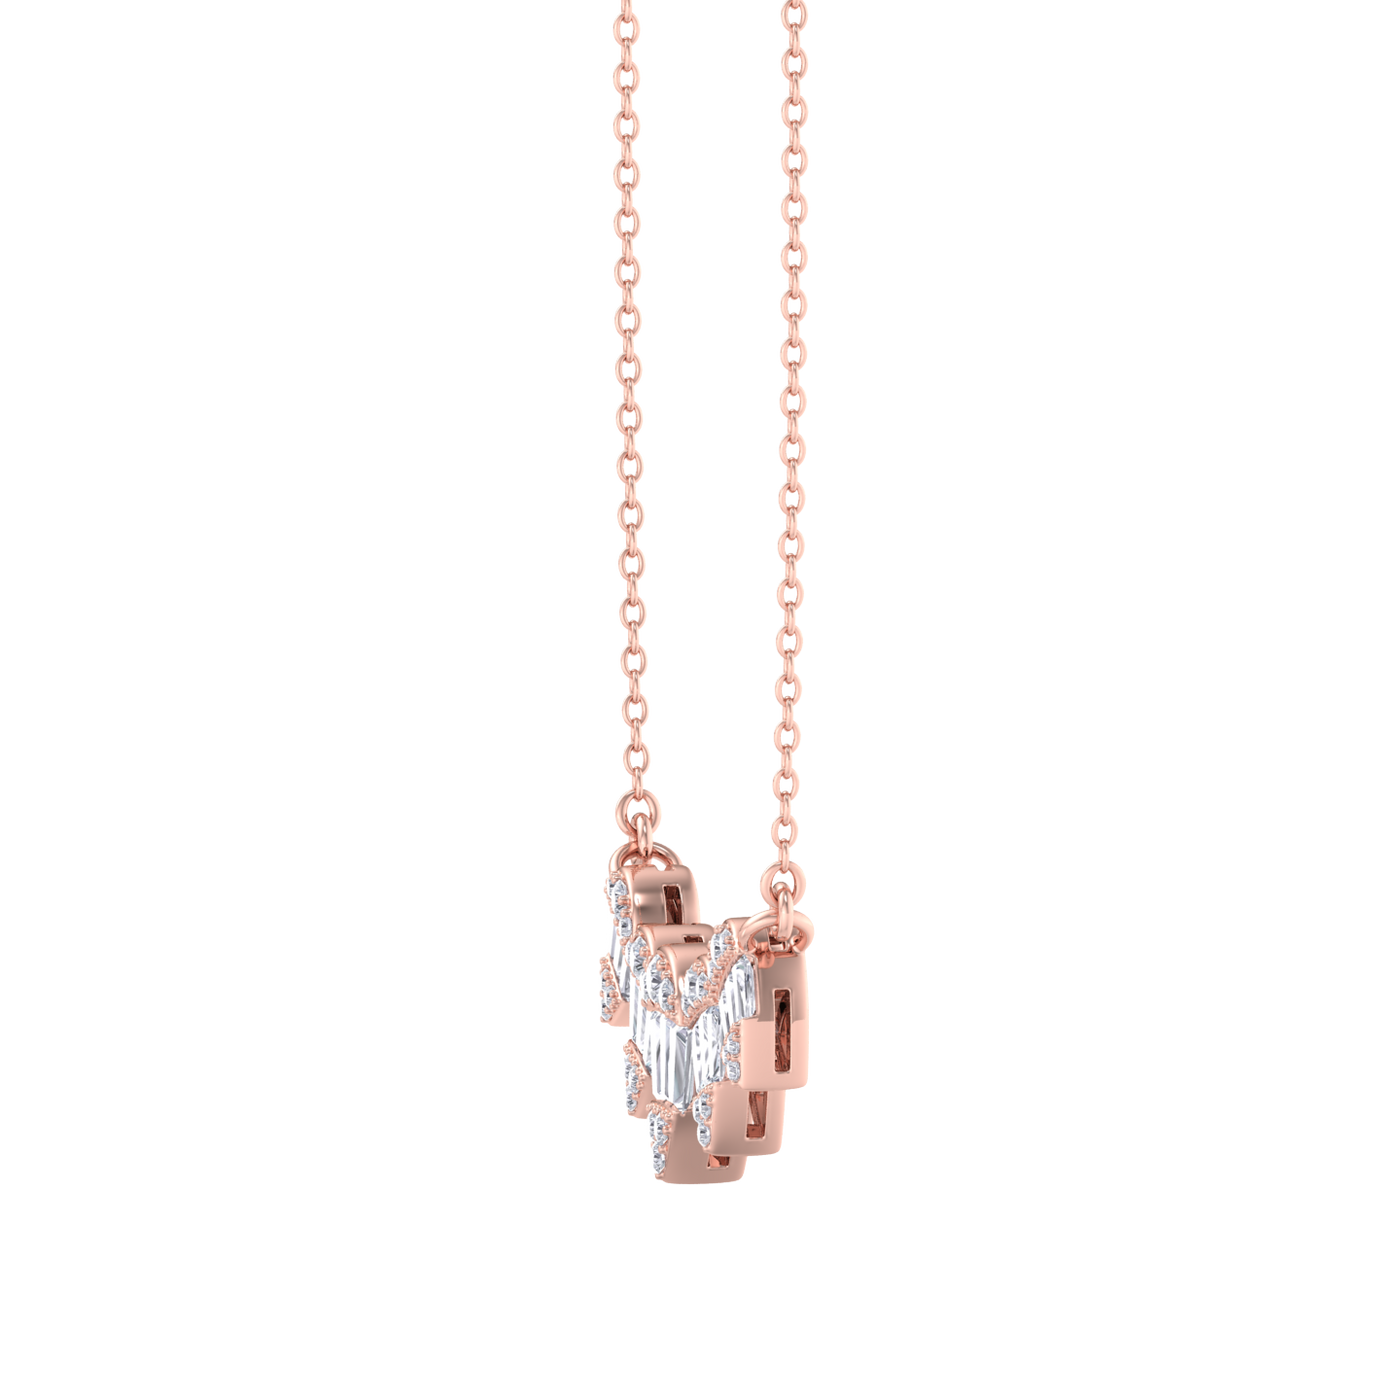 Diamond necklace in rose gold with white diamonds of 0.75 ct in weight